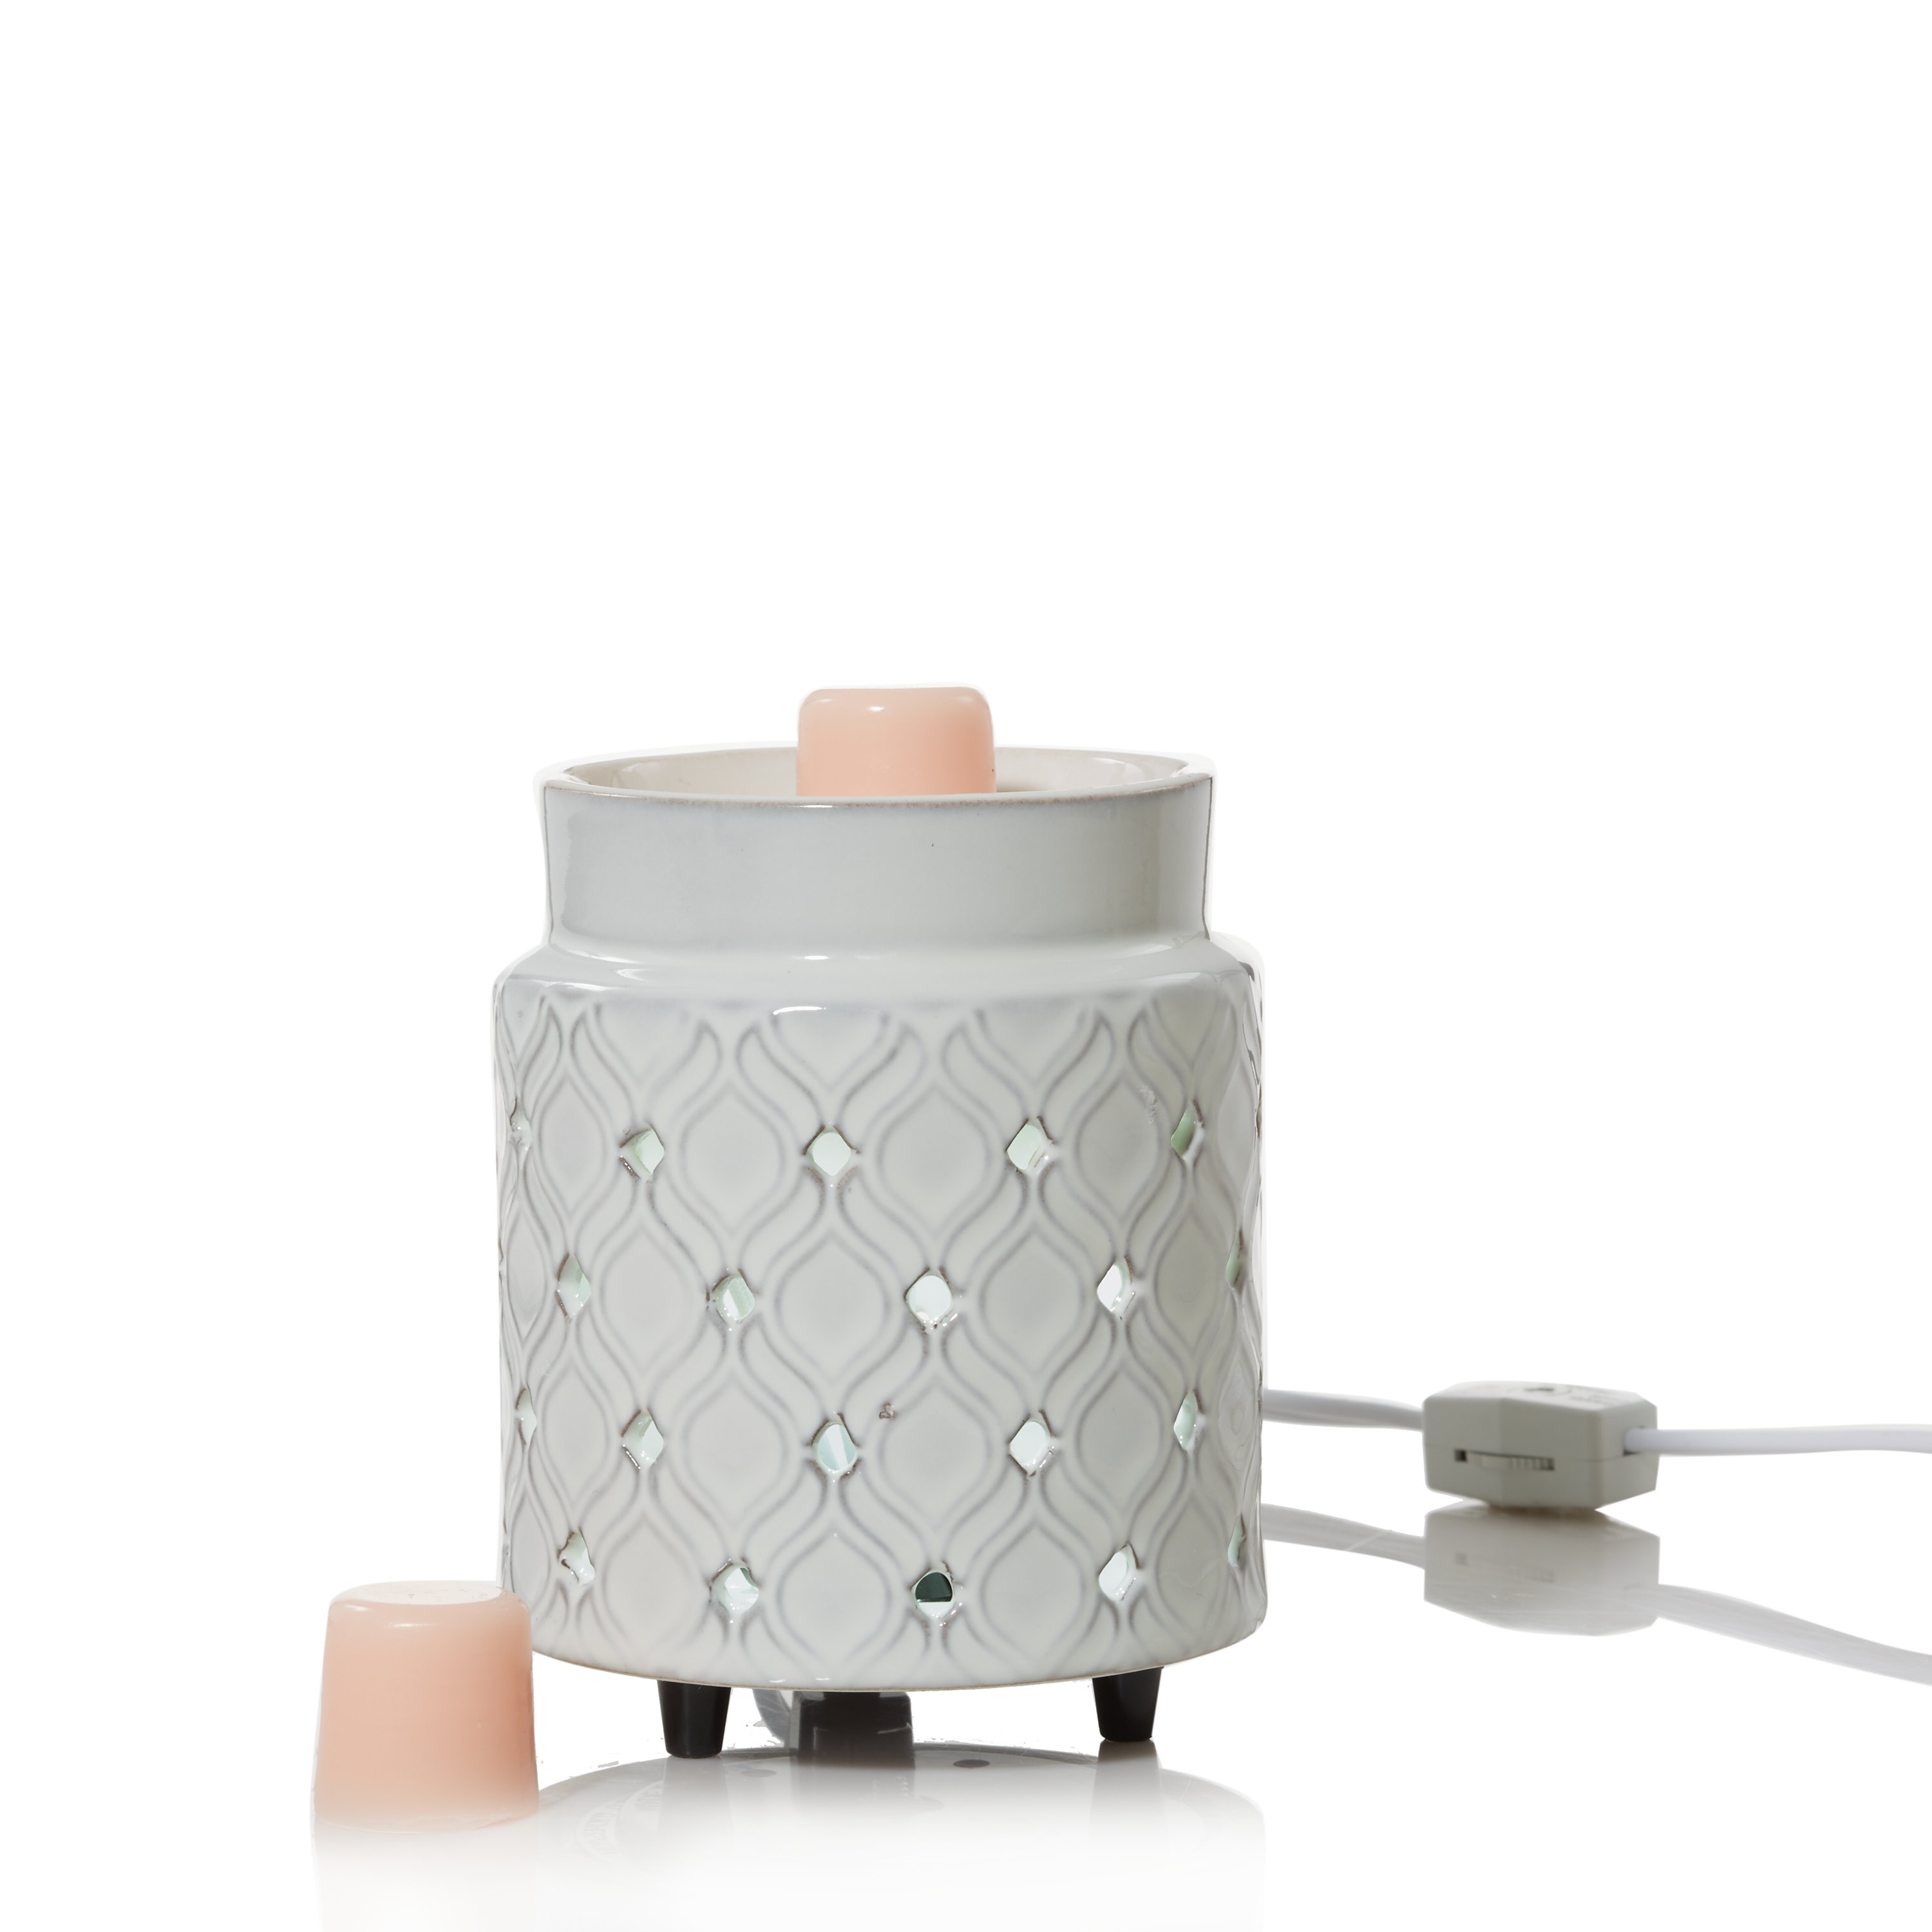 Electric Wax Melter, Burner and Warmer by Woodwick